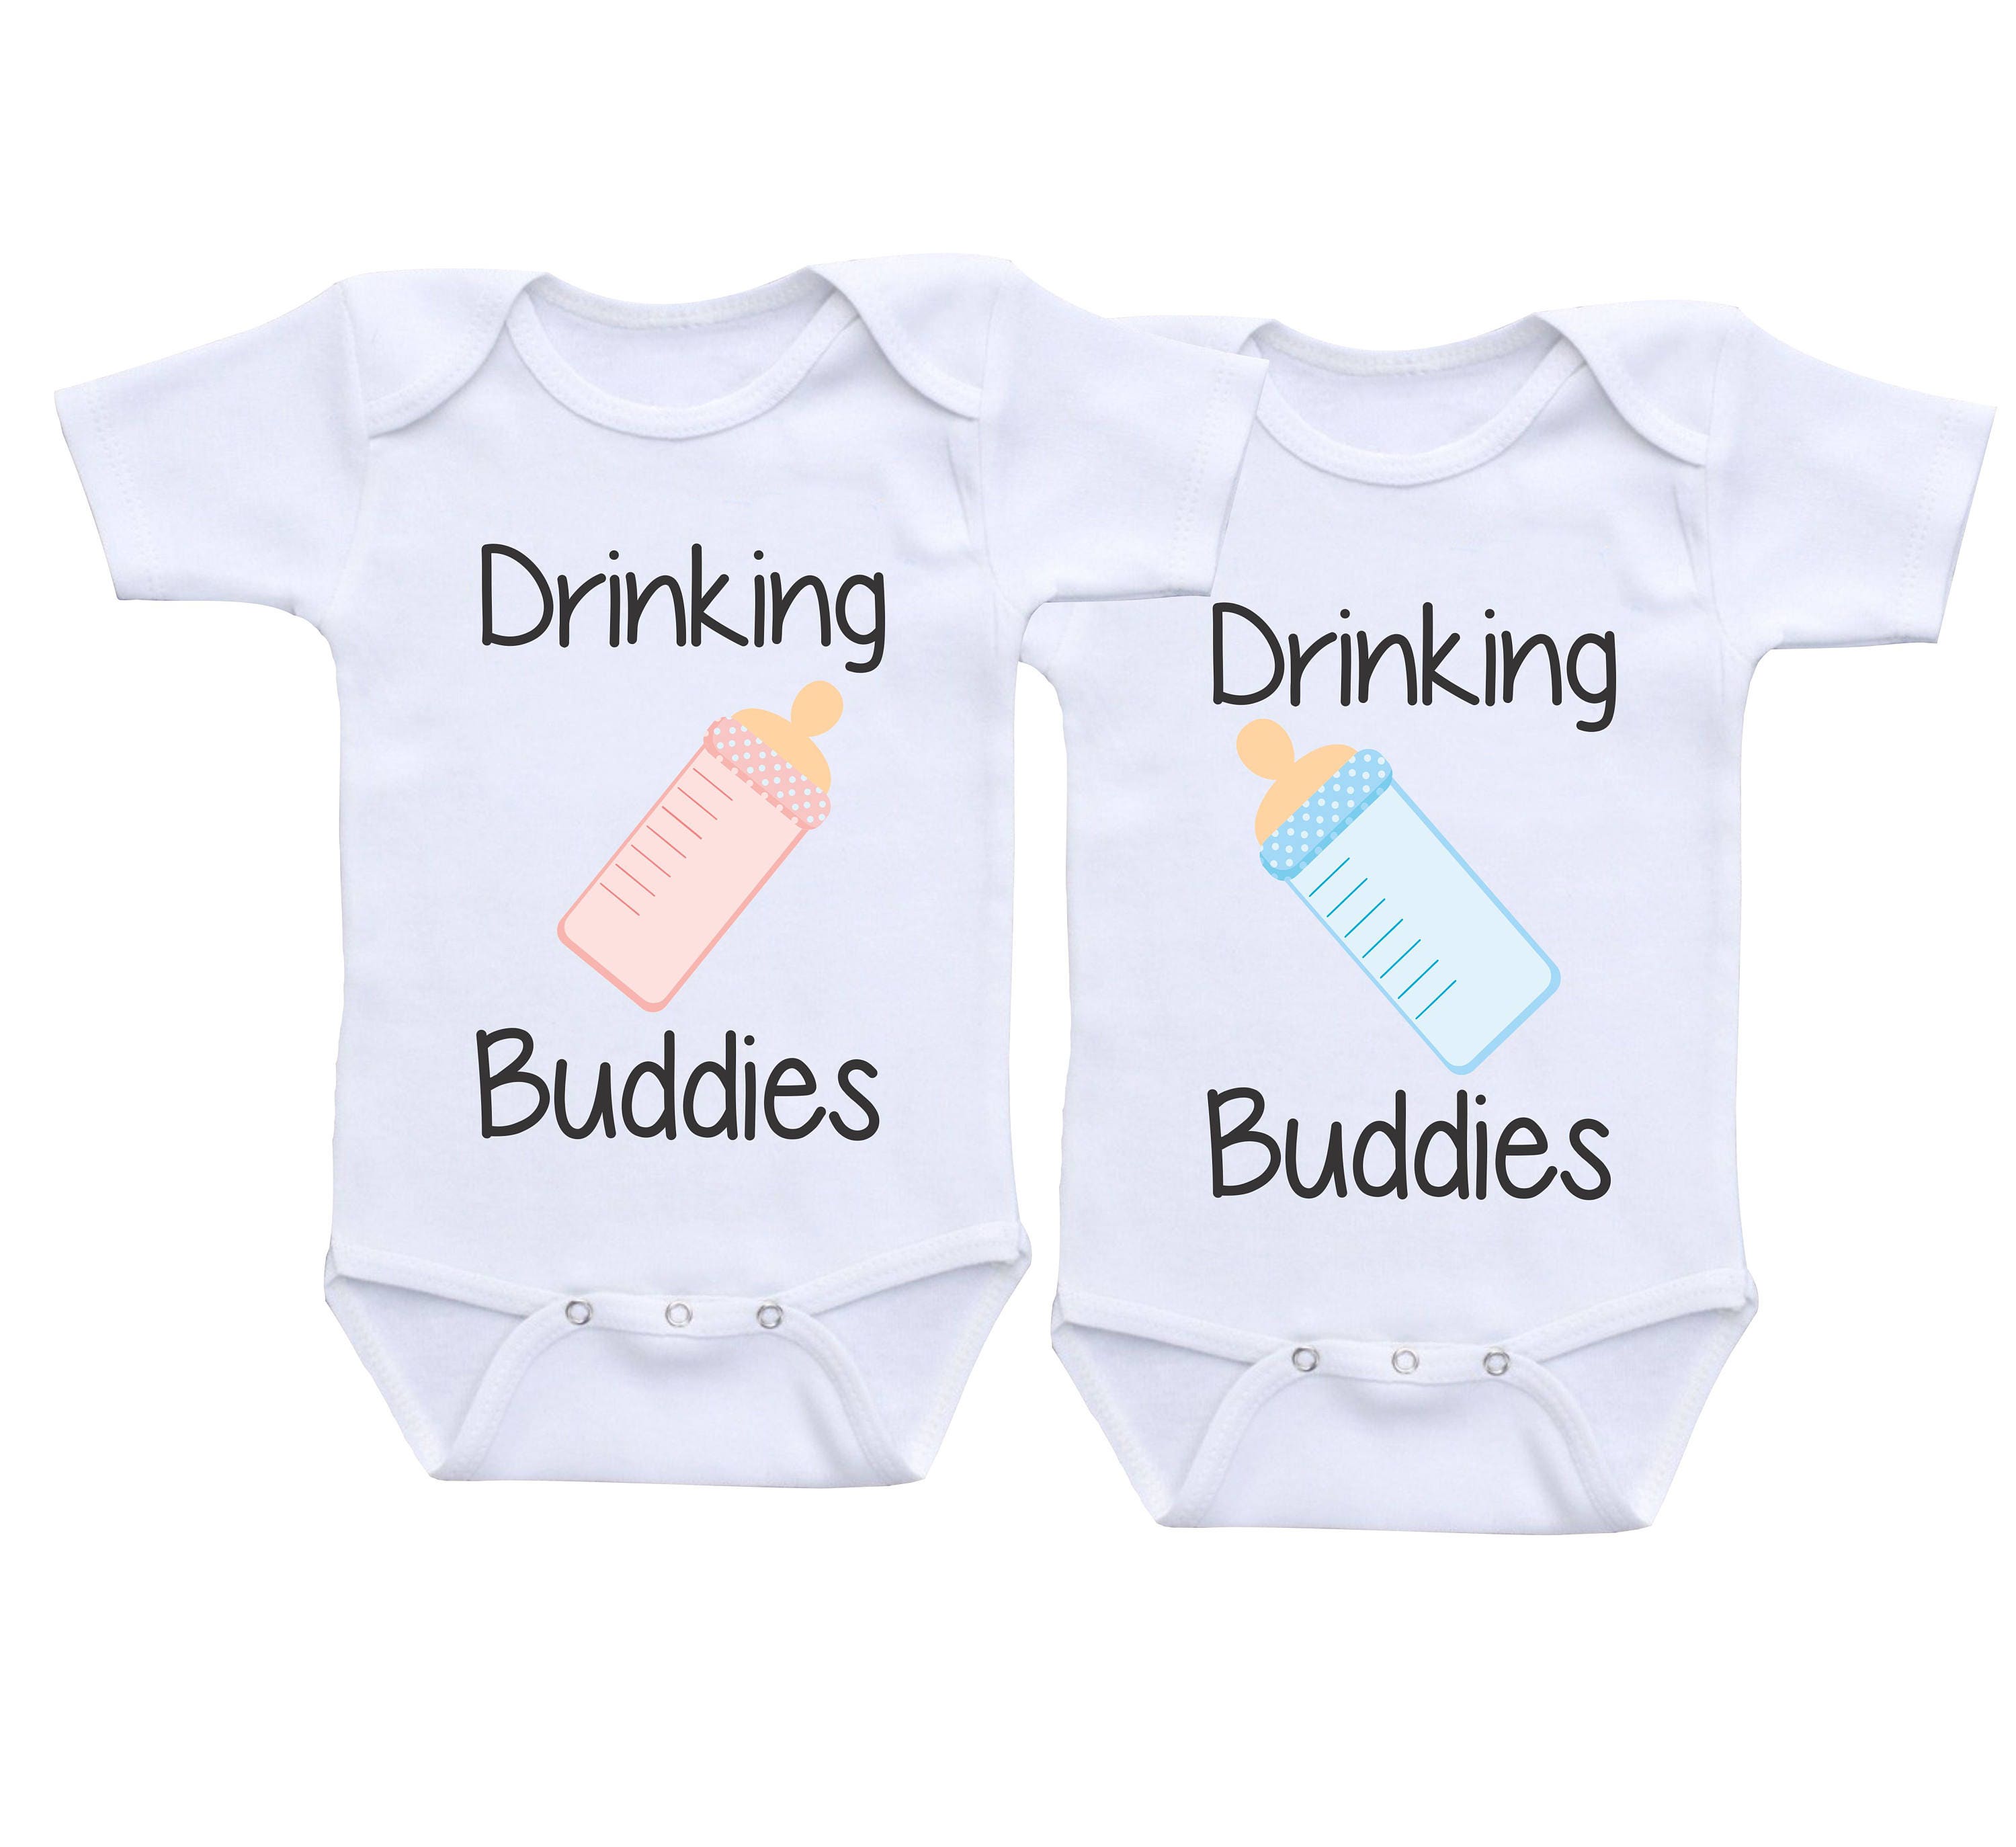 twins for girls twins bodysuits Twins Outfits Twins Baby Shower Twins Baby Gifts twin mom gifts twins girls Twin gifts TWINS ONESIES